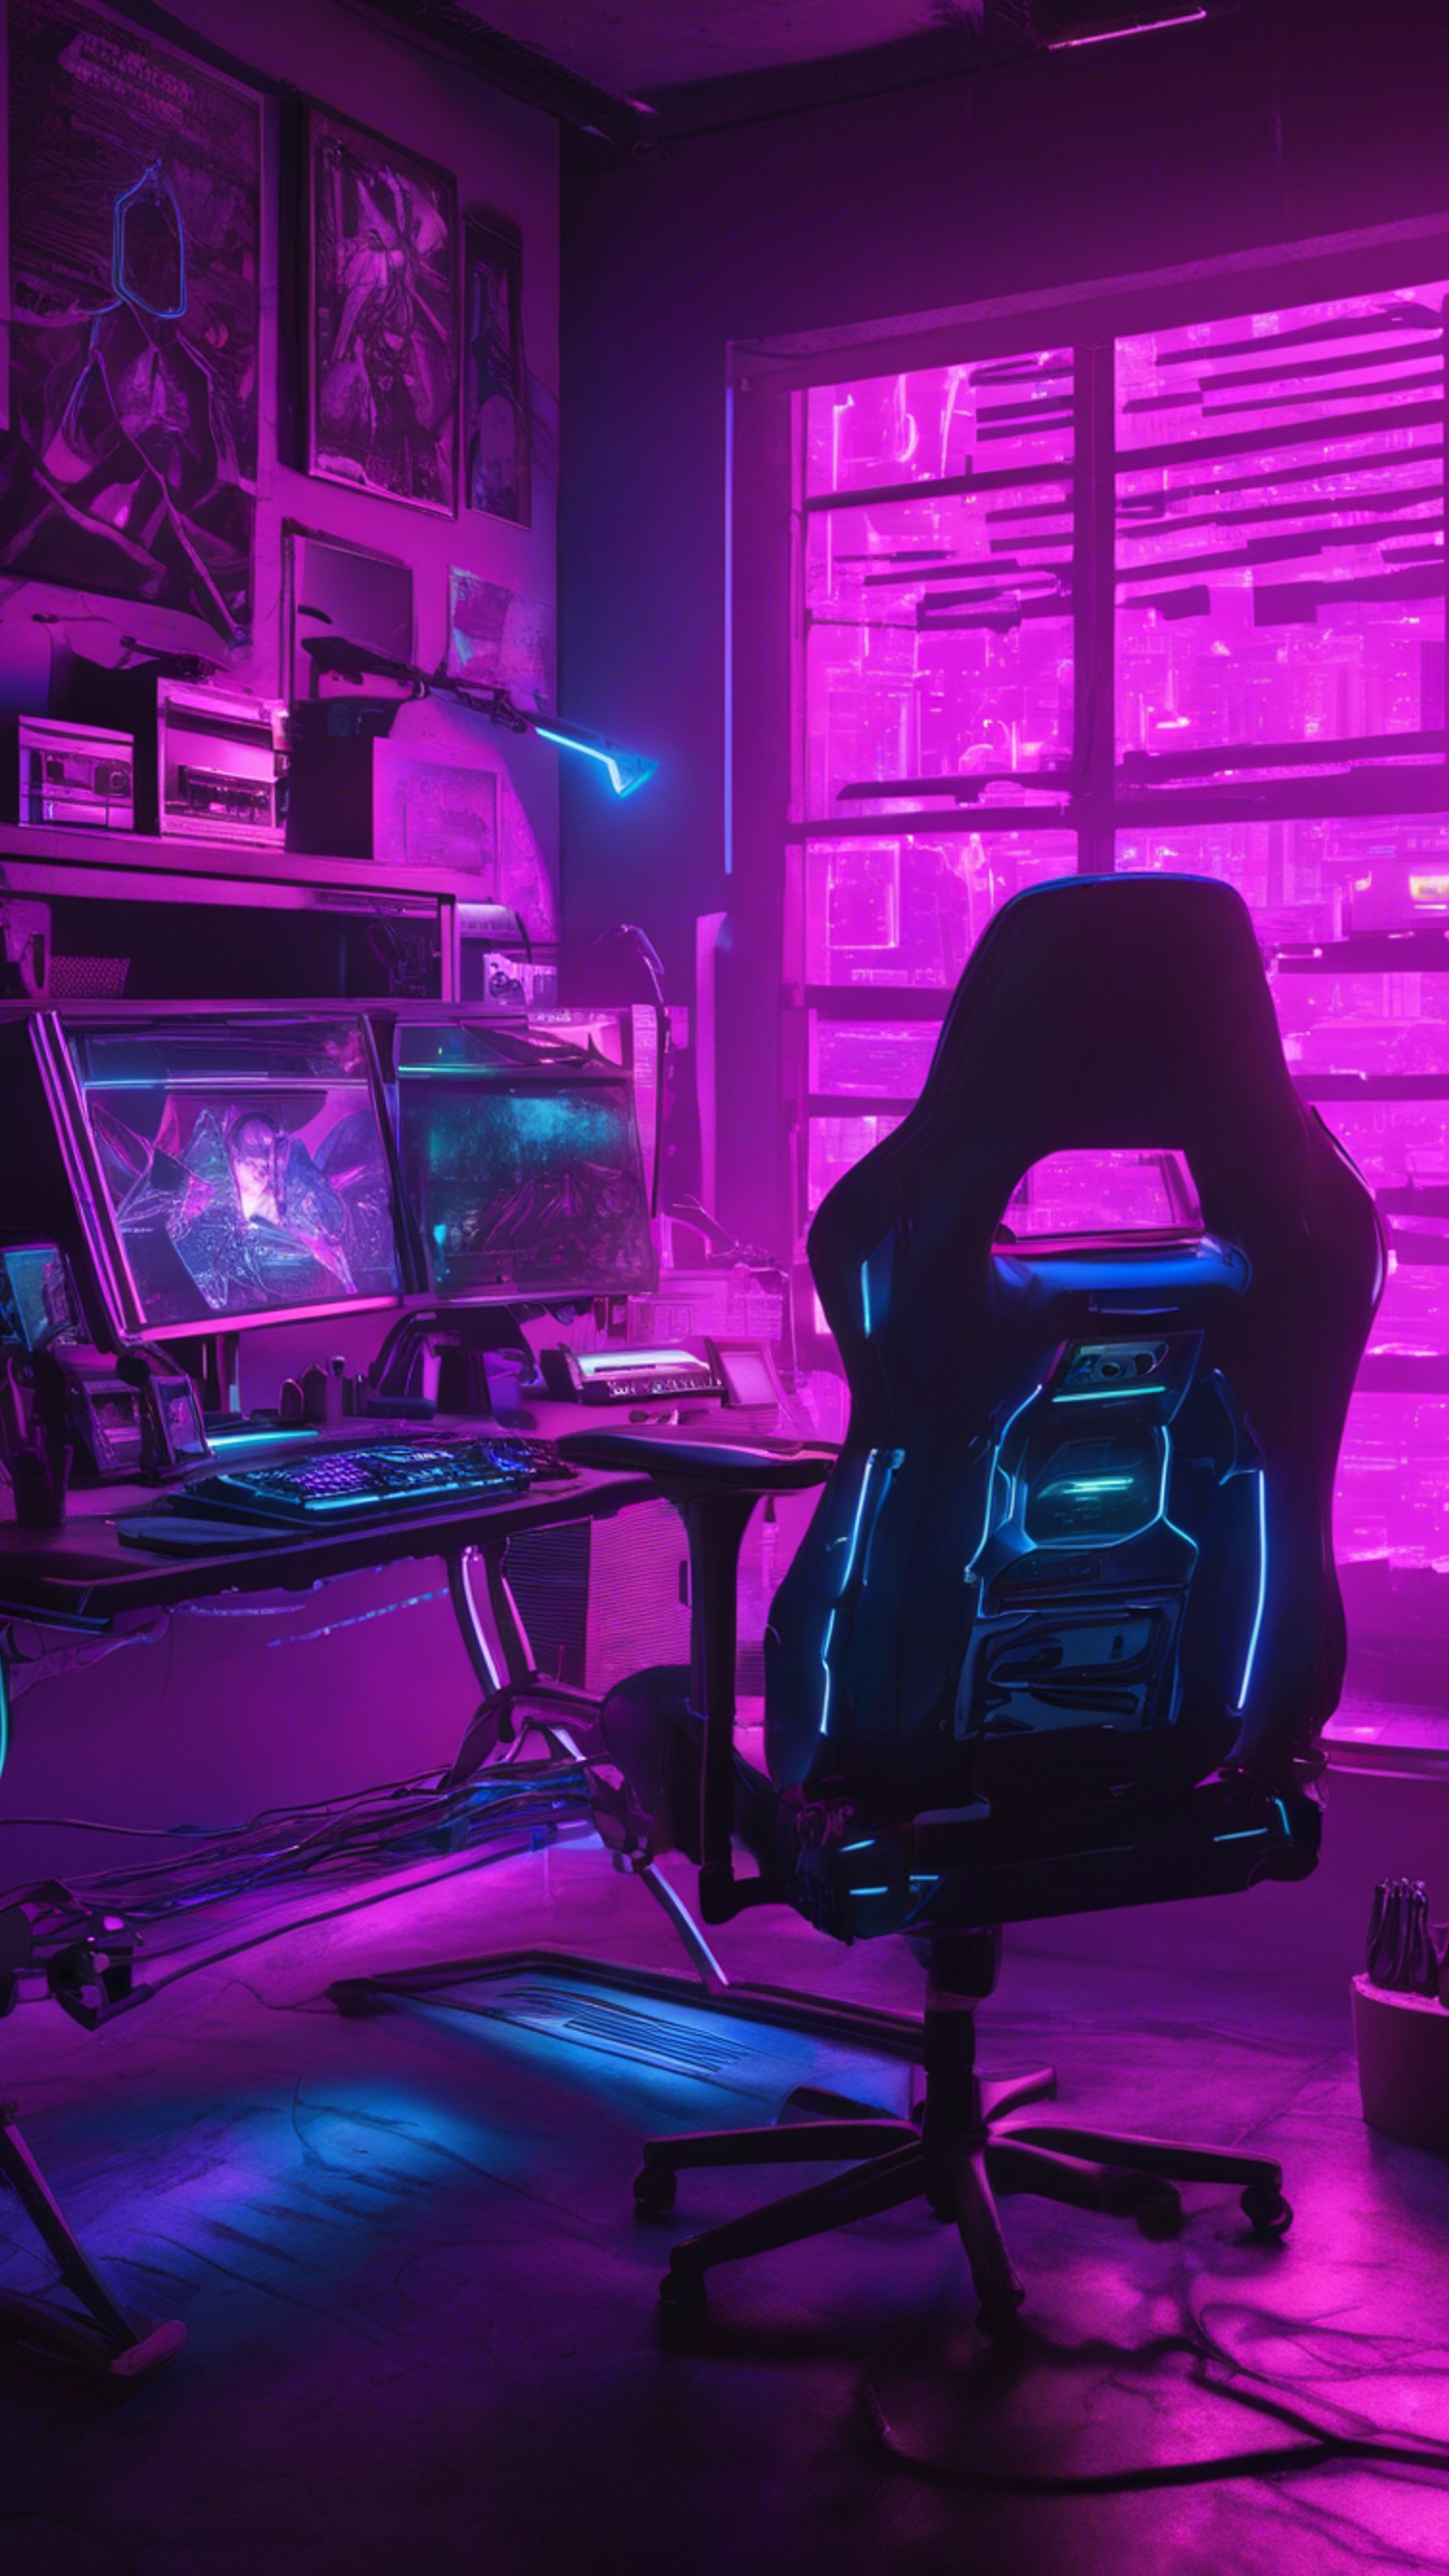 A modern gaming room lit with neon purple lights, showing an advanced gaming set up on a sleek desk.壁紙[eb087c215e784f138c4c]